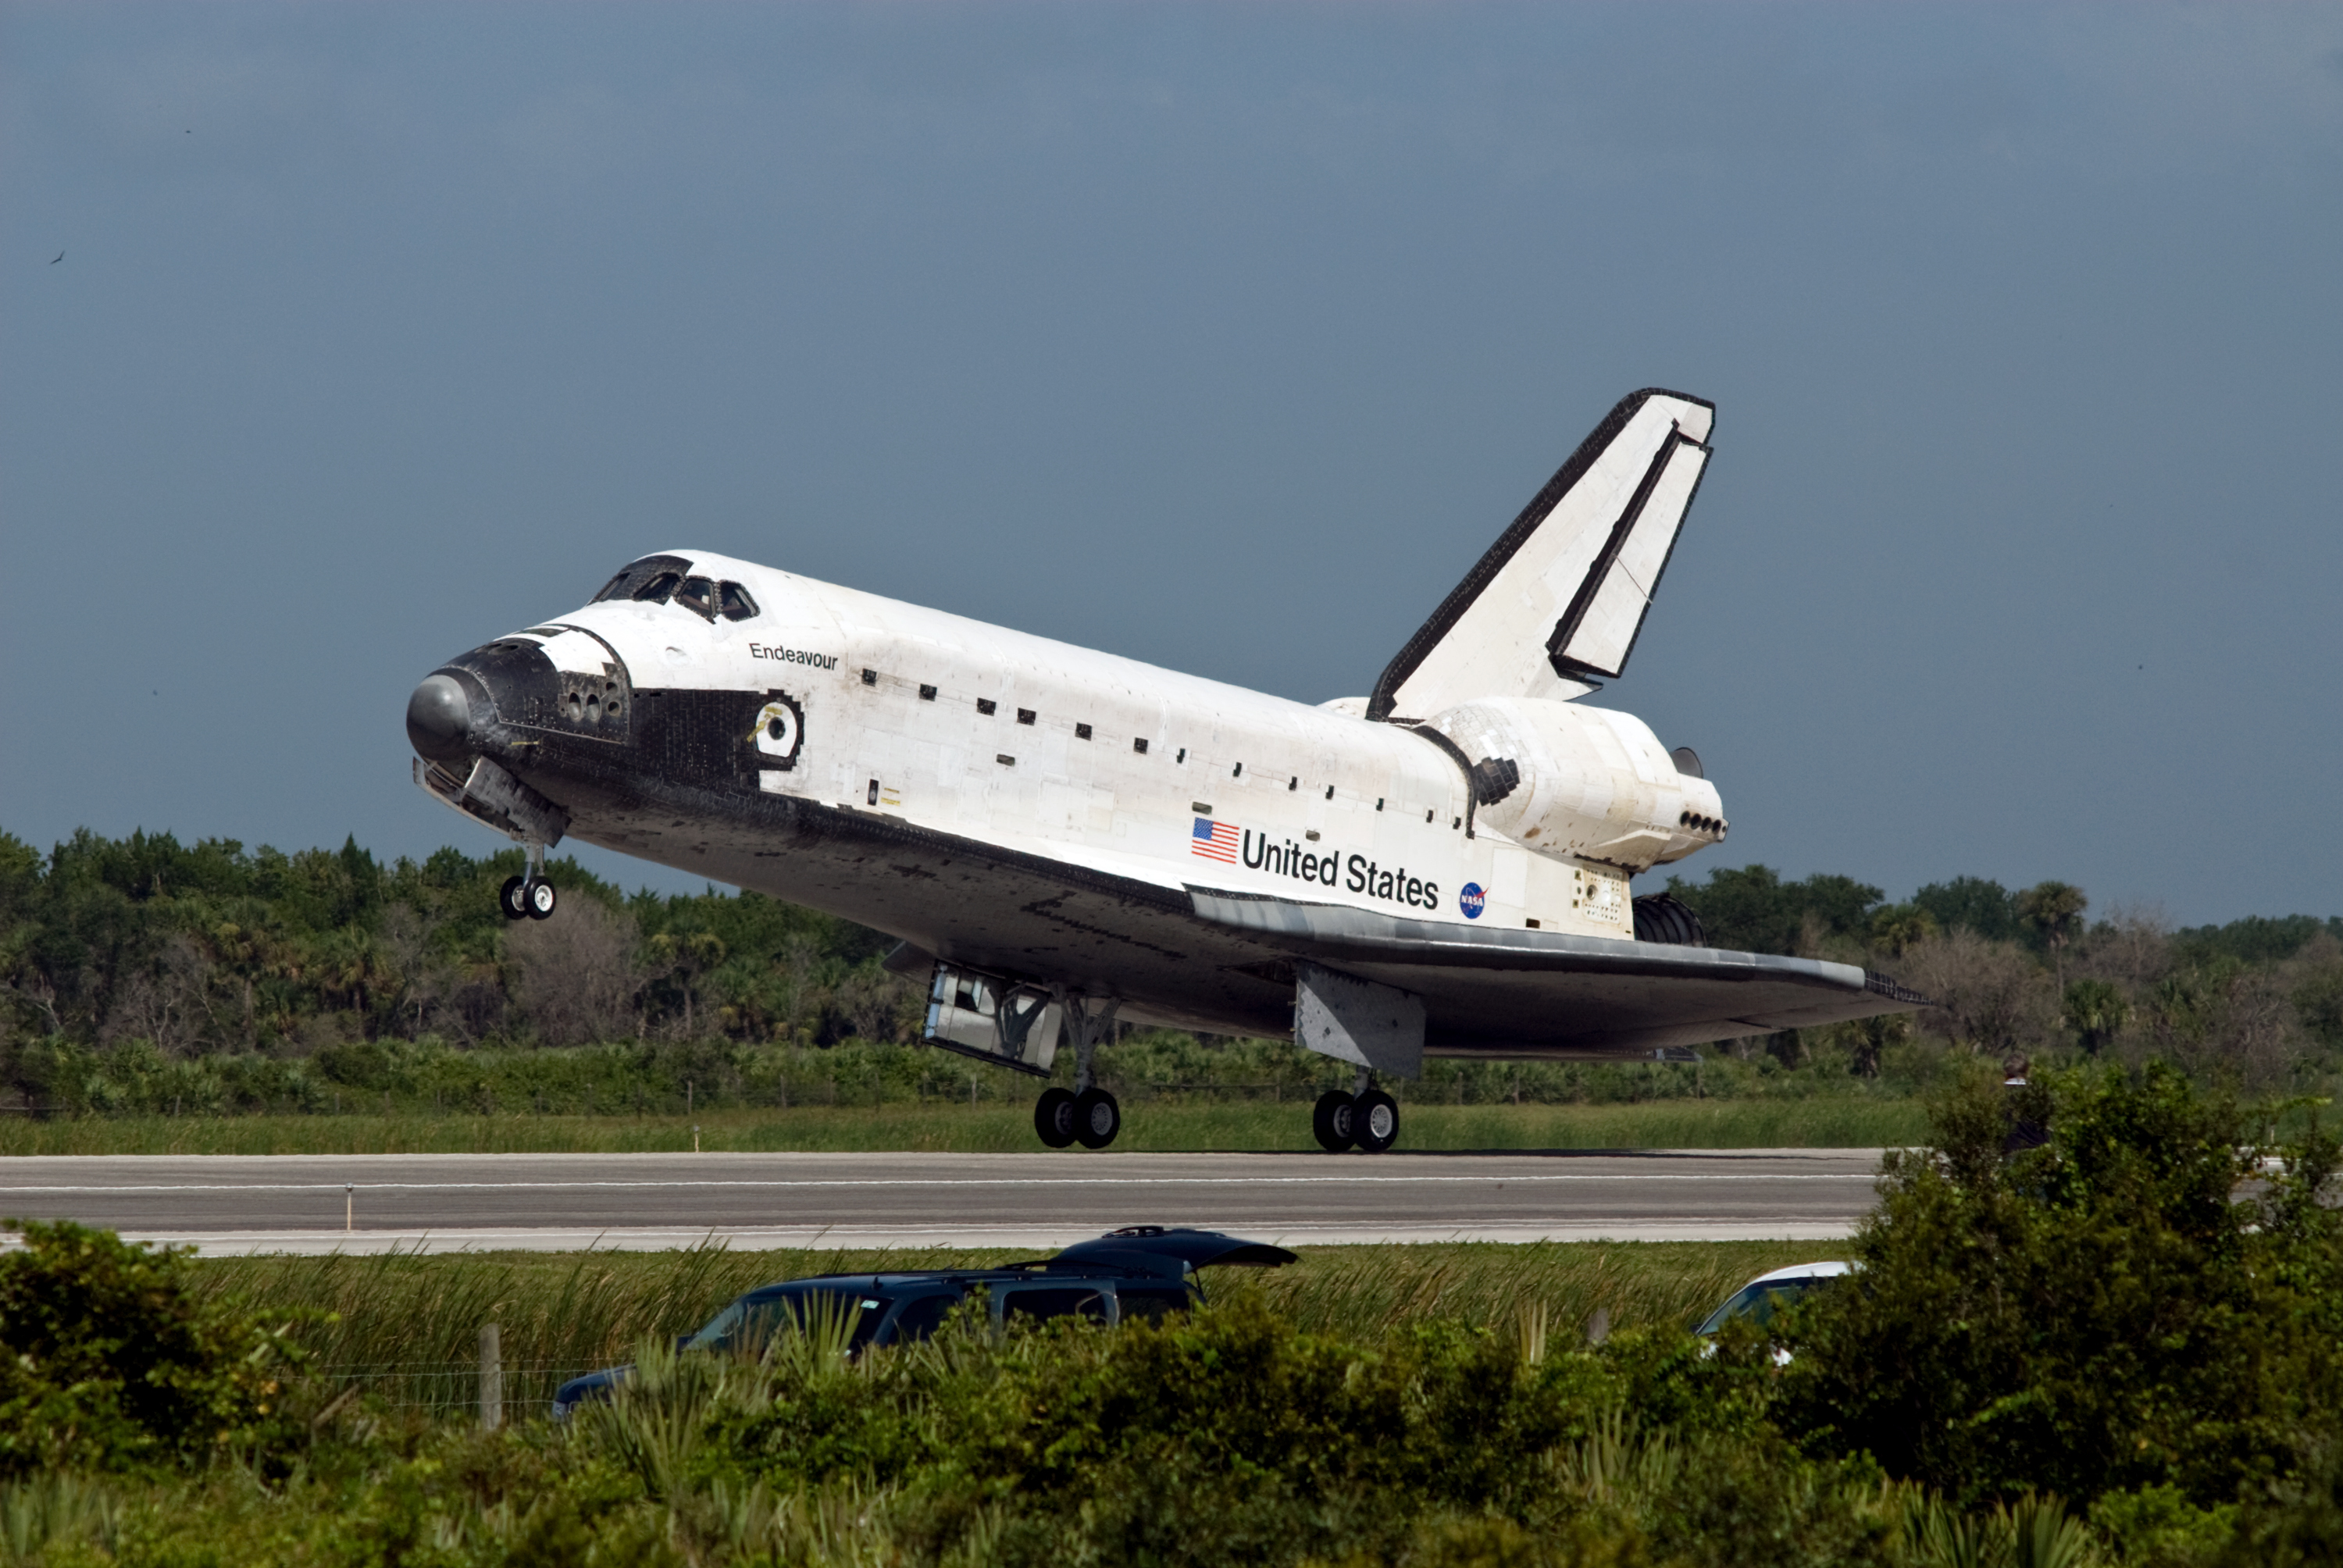 Space Shuttle Endeavour Lands at the Kennedy Space Center on July 31st, 2009.